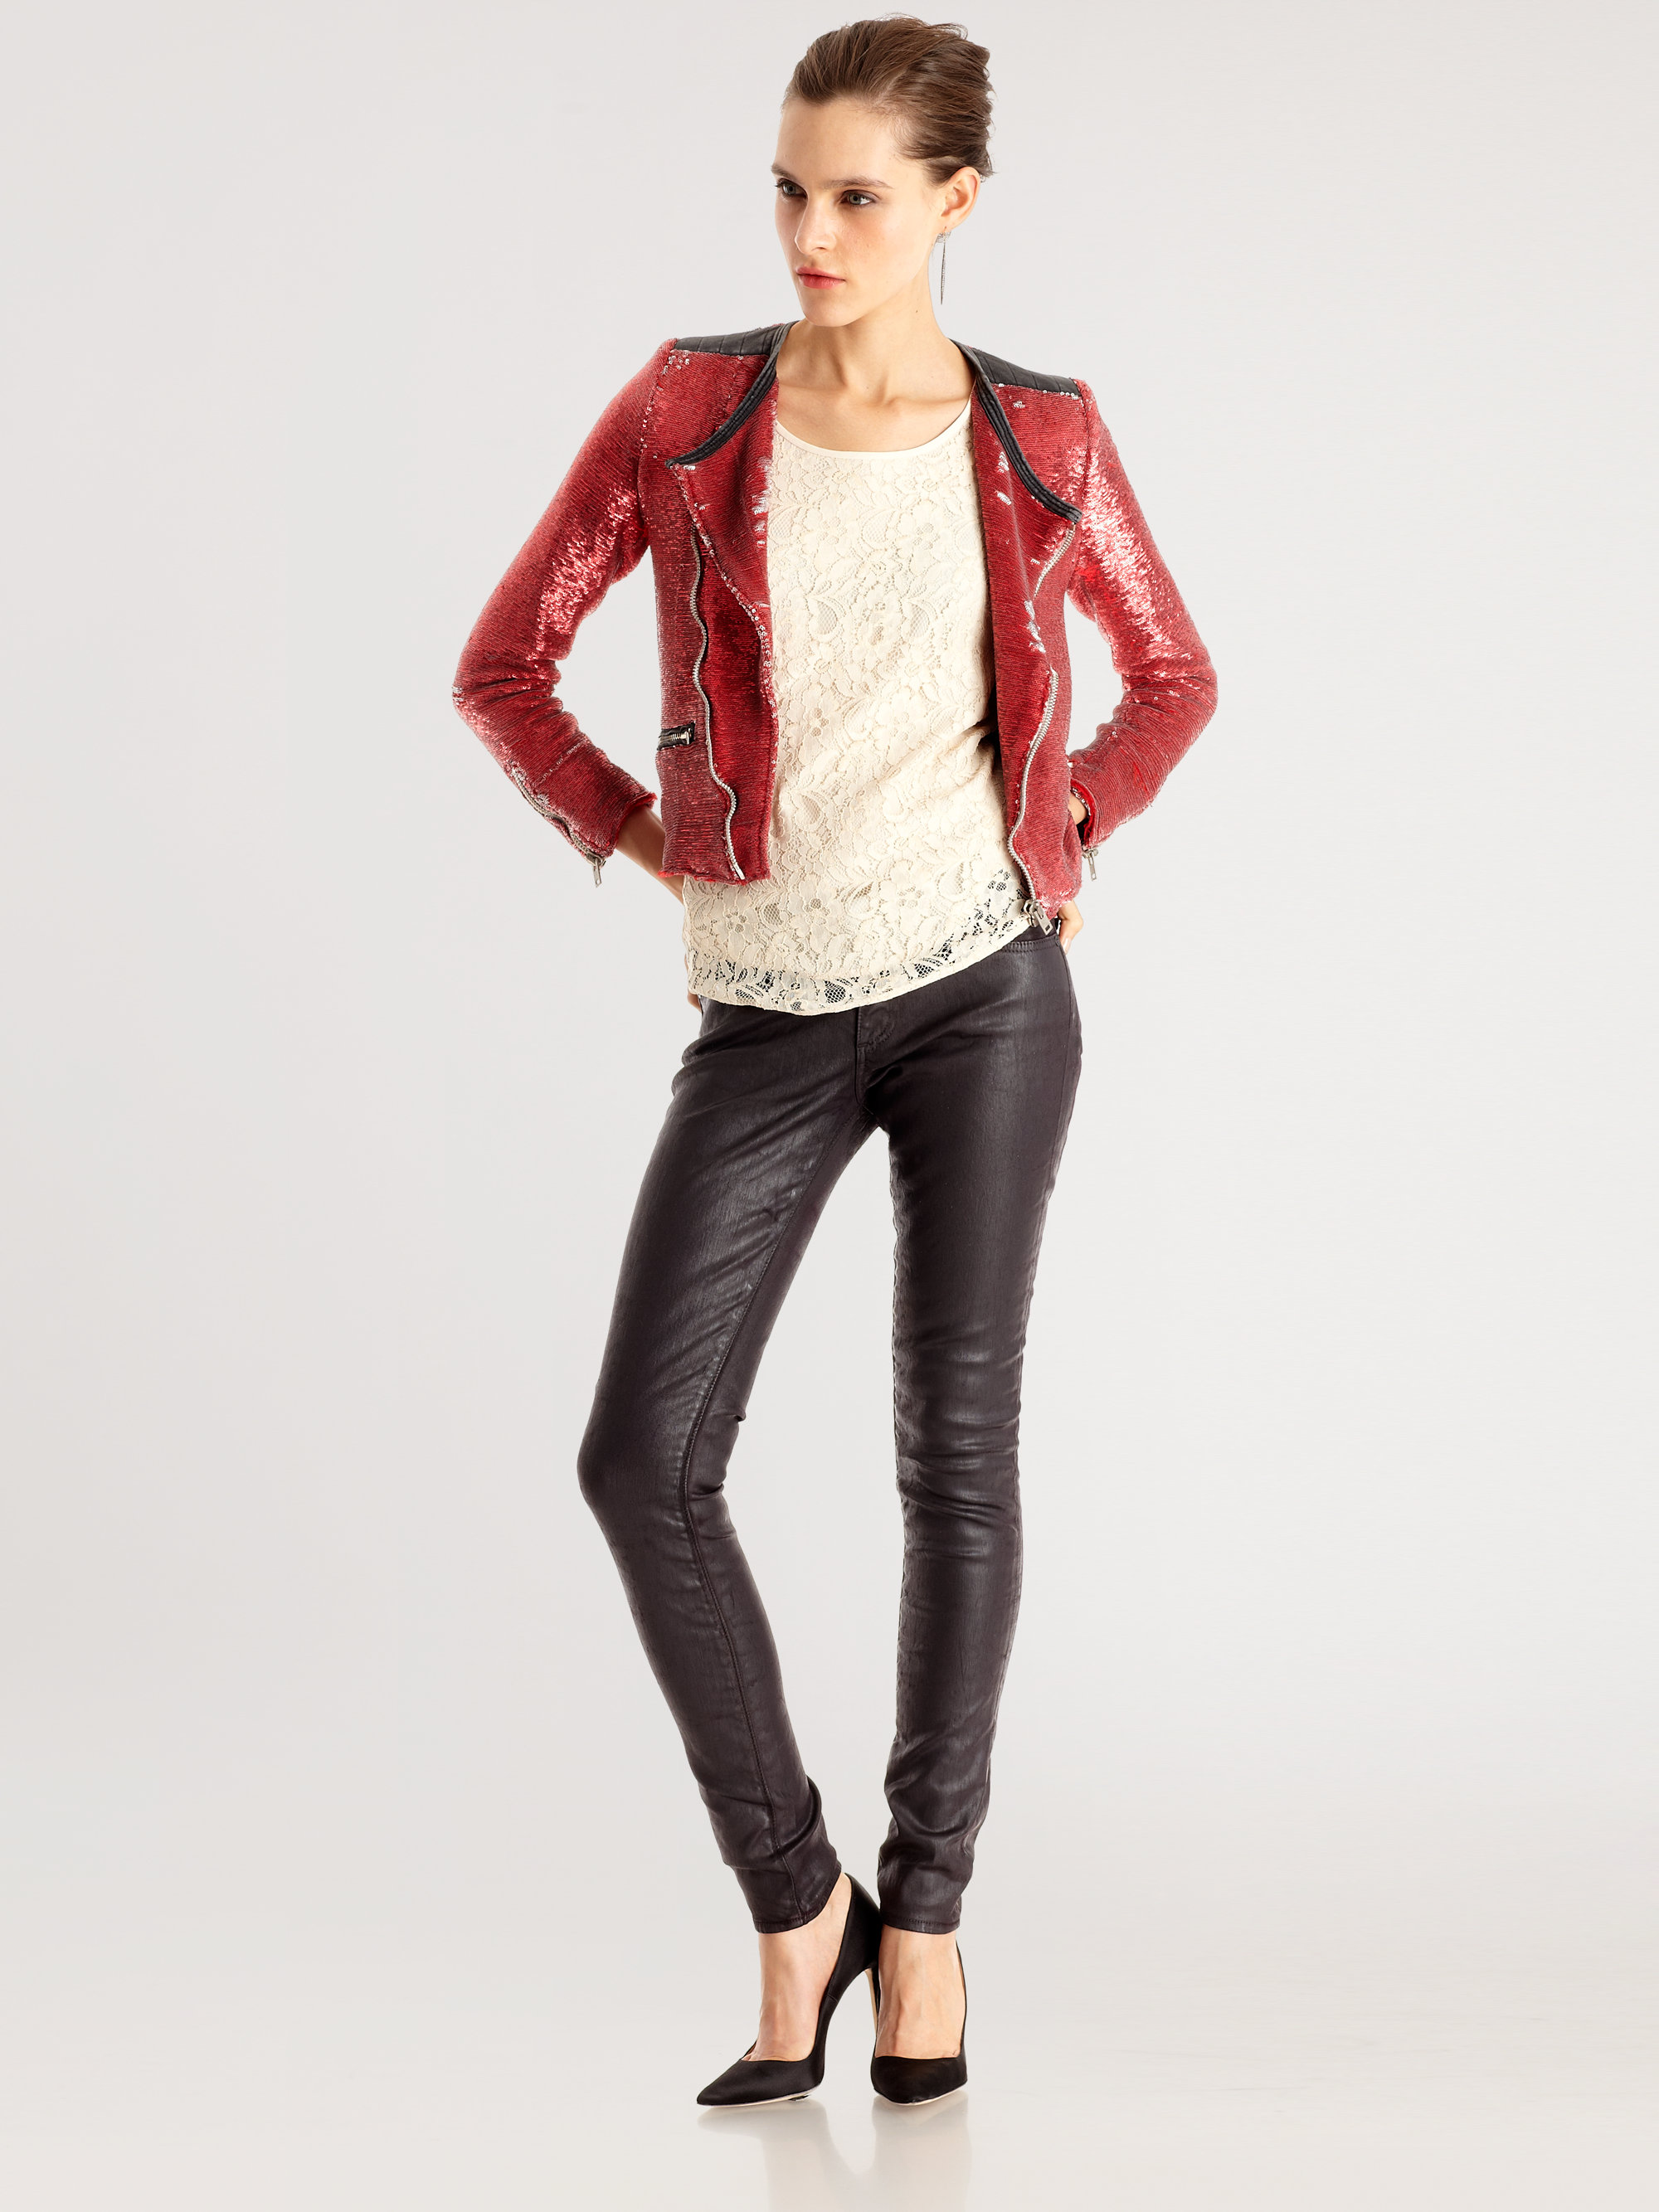 Iro Longina Sequin Motorcycle Jacket in Red | Lyst